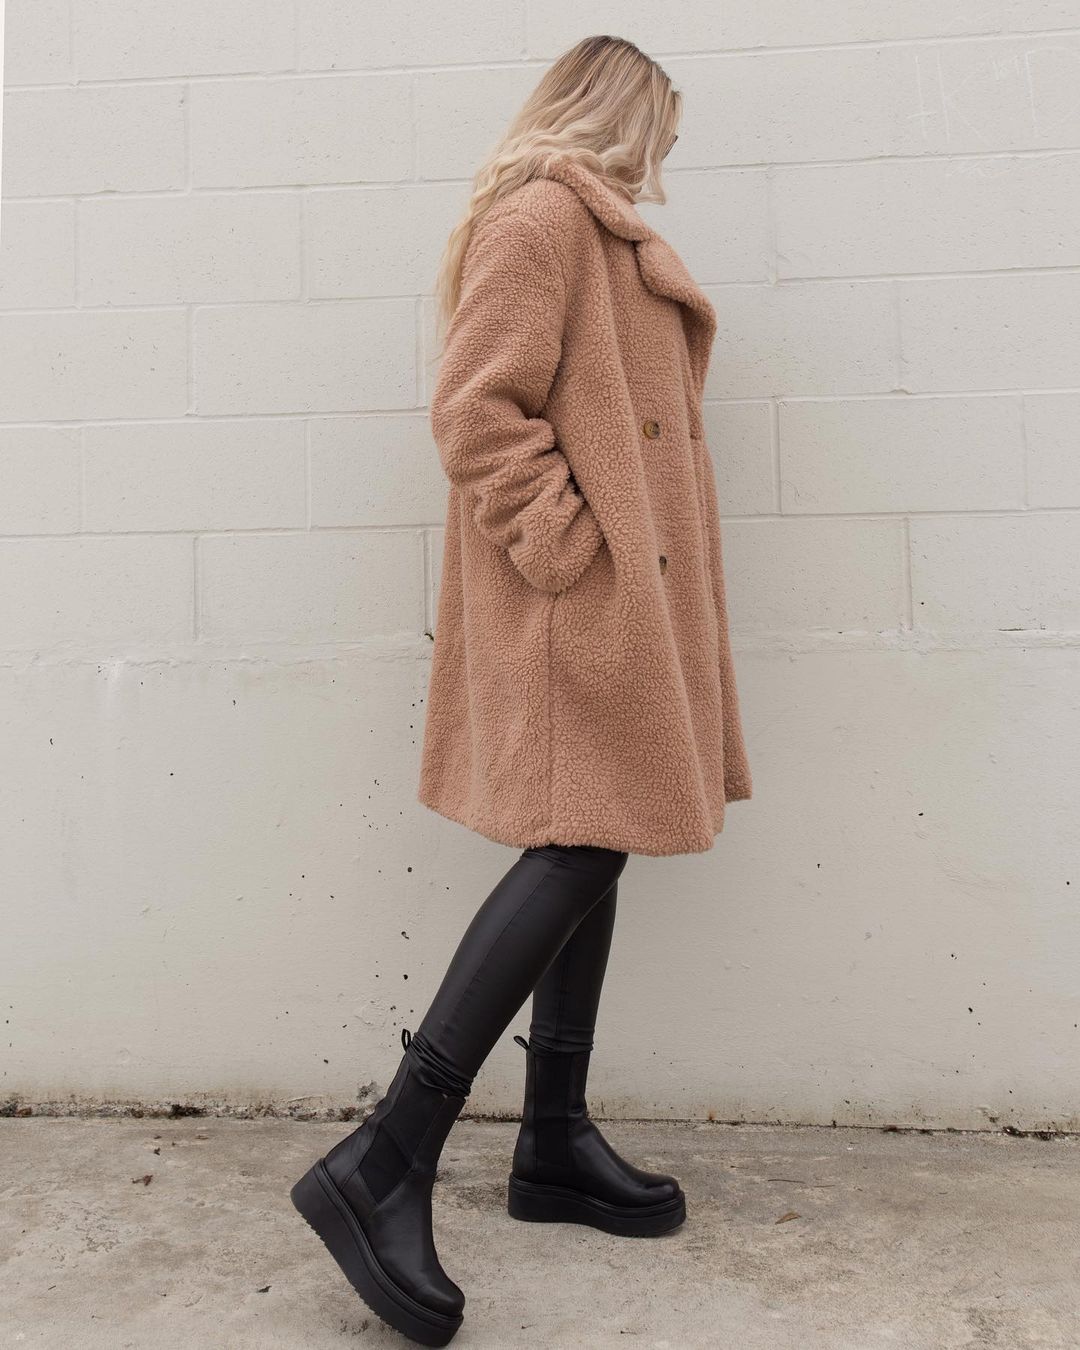 Teddy Coats are Still a Favorite Trend This Fall and Winter — @kimberly.schmalz in furry coat, black leather  leggings, and lug-sole boots